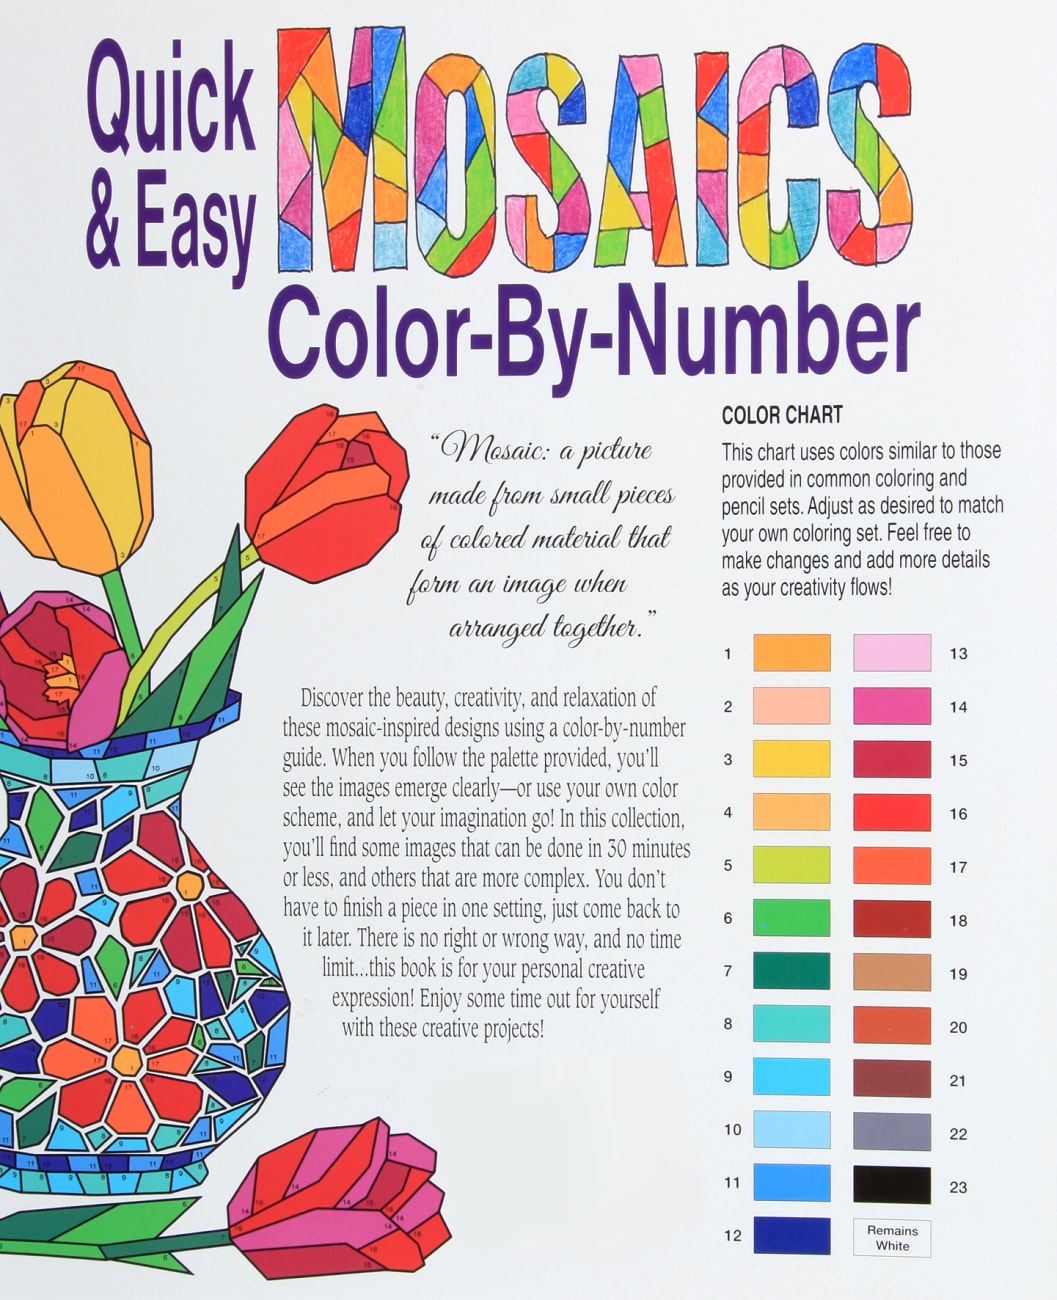 Quick & Easy Mosaics Color By Number - Color Shape-By-Shape and See the Image Emerge! (Adult Coloring Books Series) Paperback